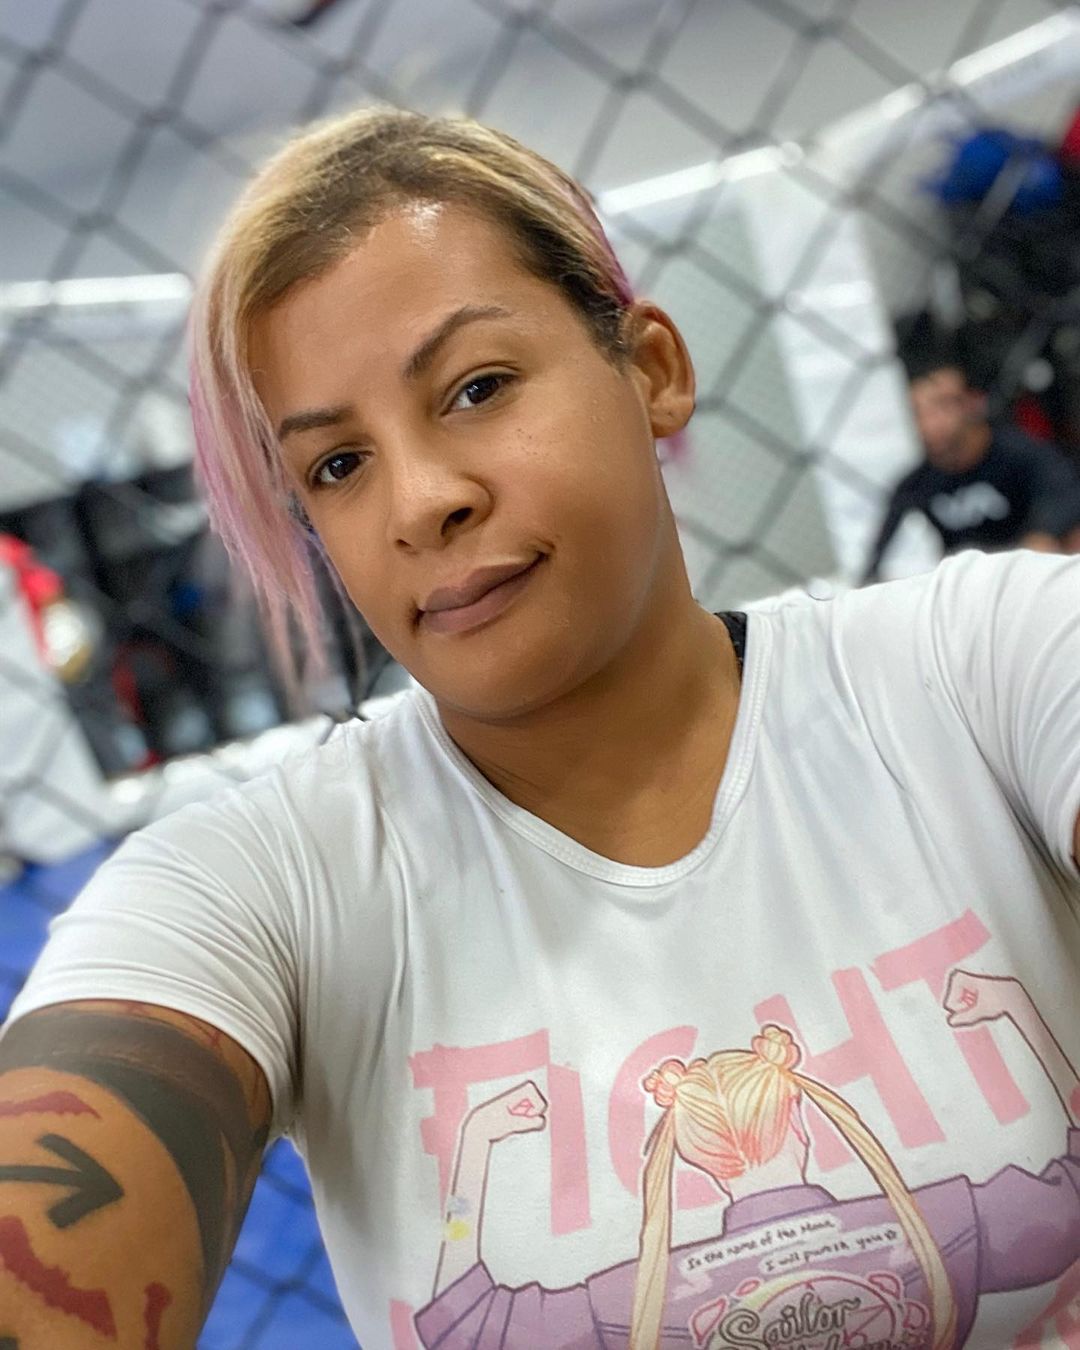 Joe Rogan Clarifies Stance On Transgender MMA Fighters After Stating Star Was A 'F***ing Man'